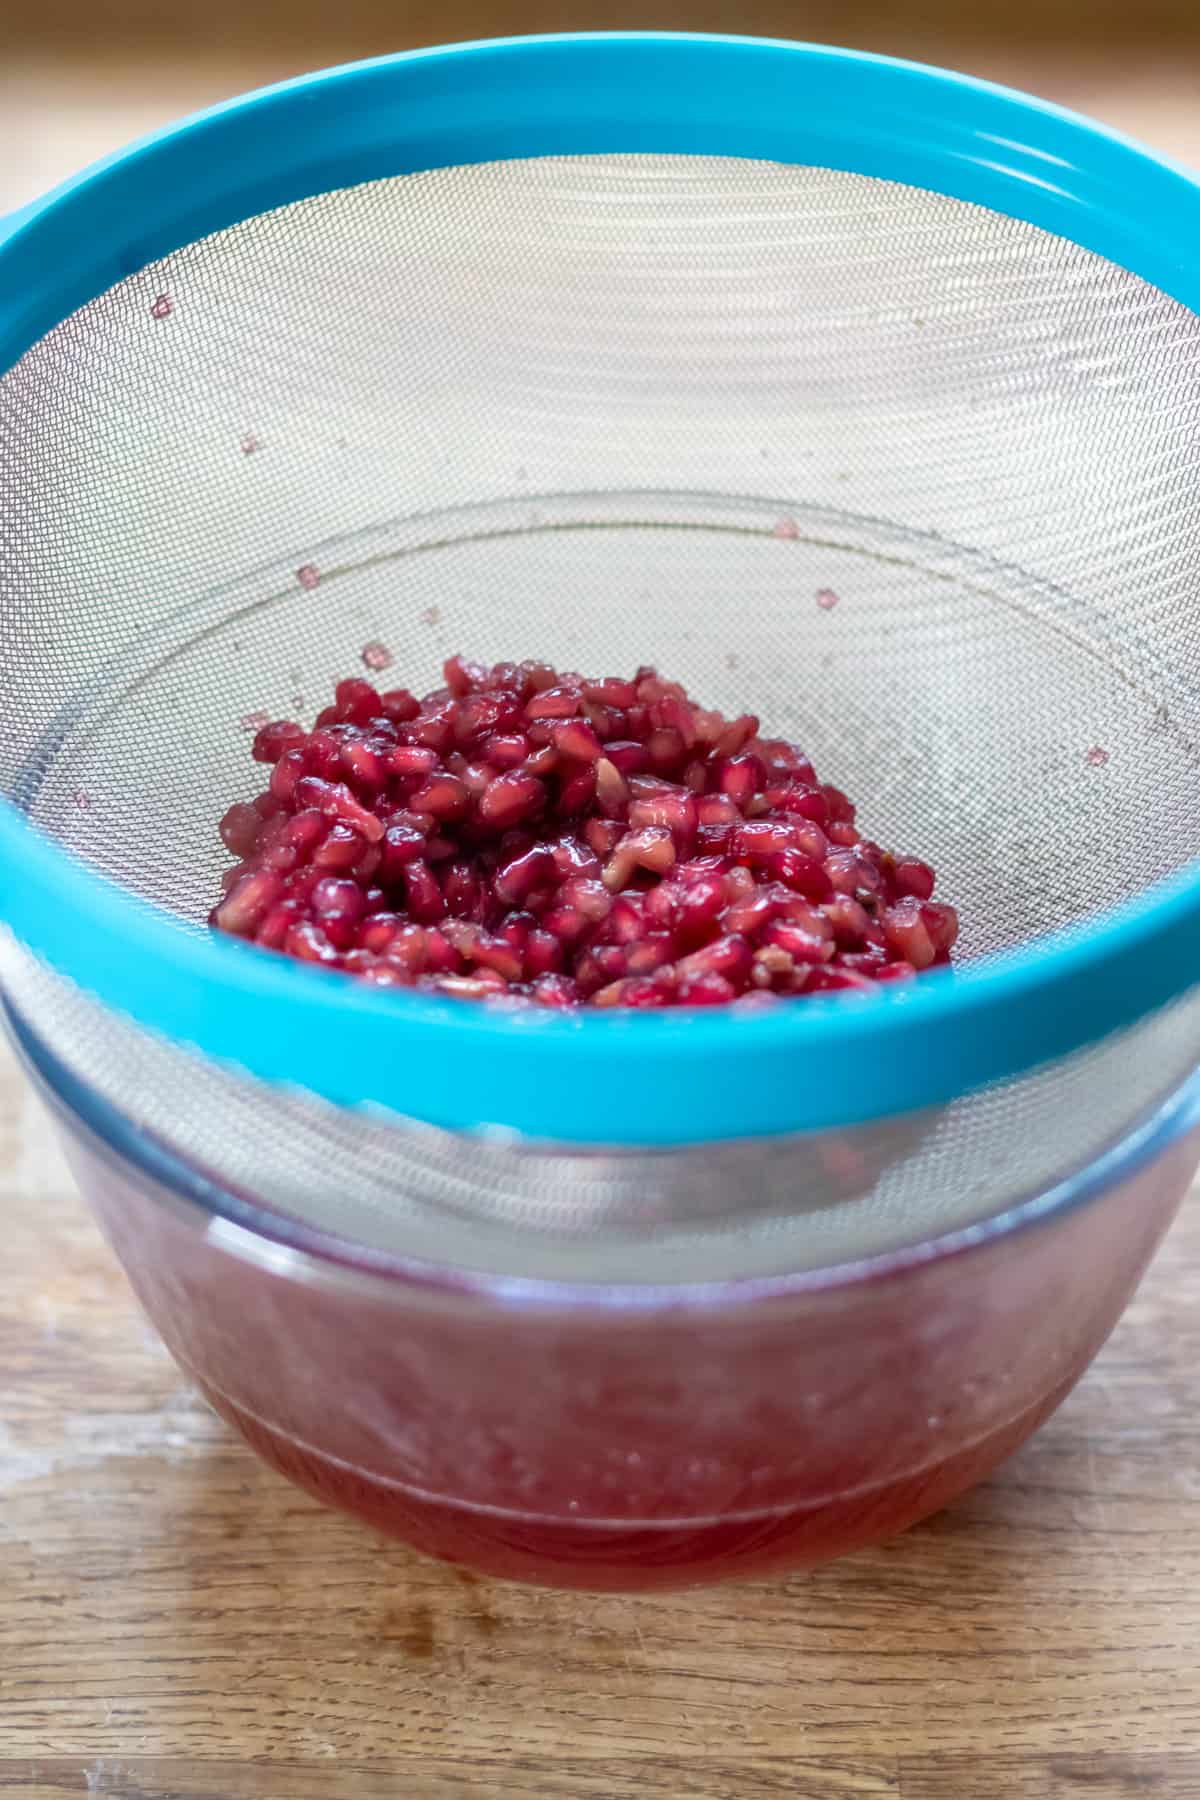 Straining the pomegranate syrup.